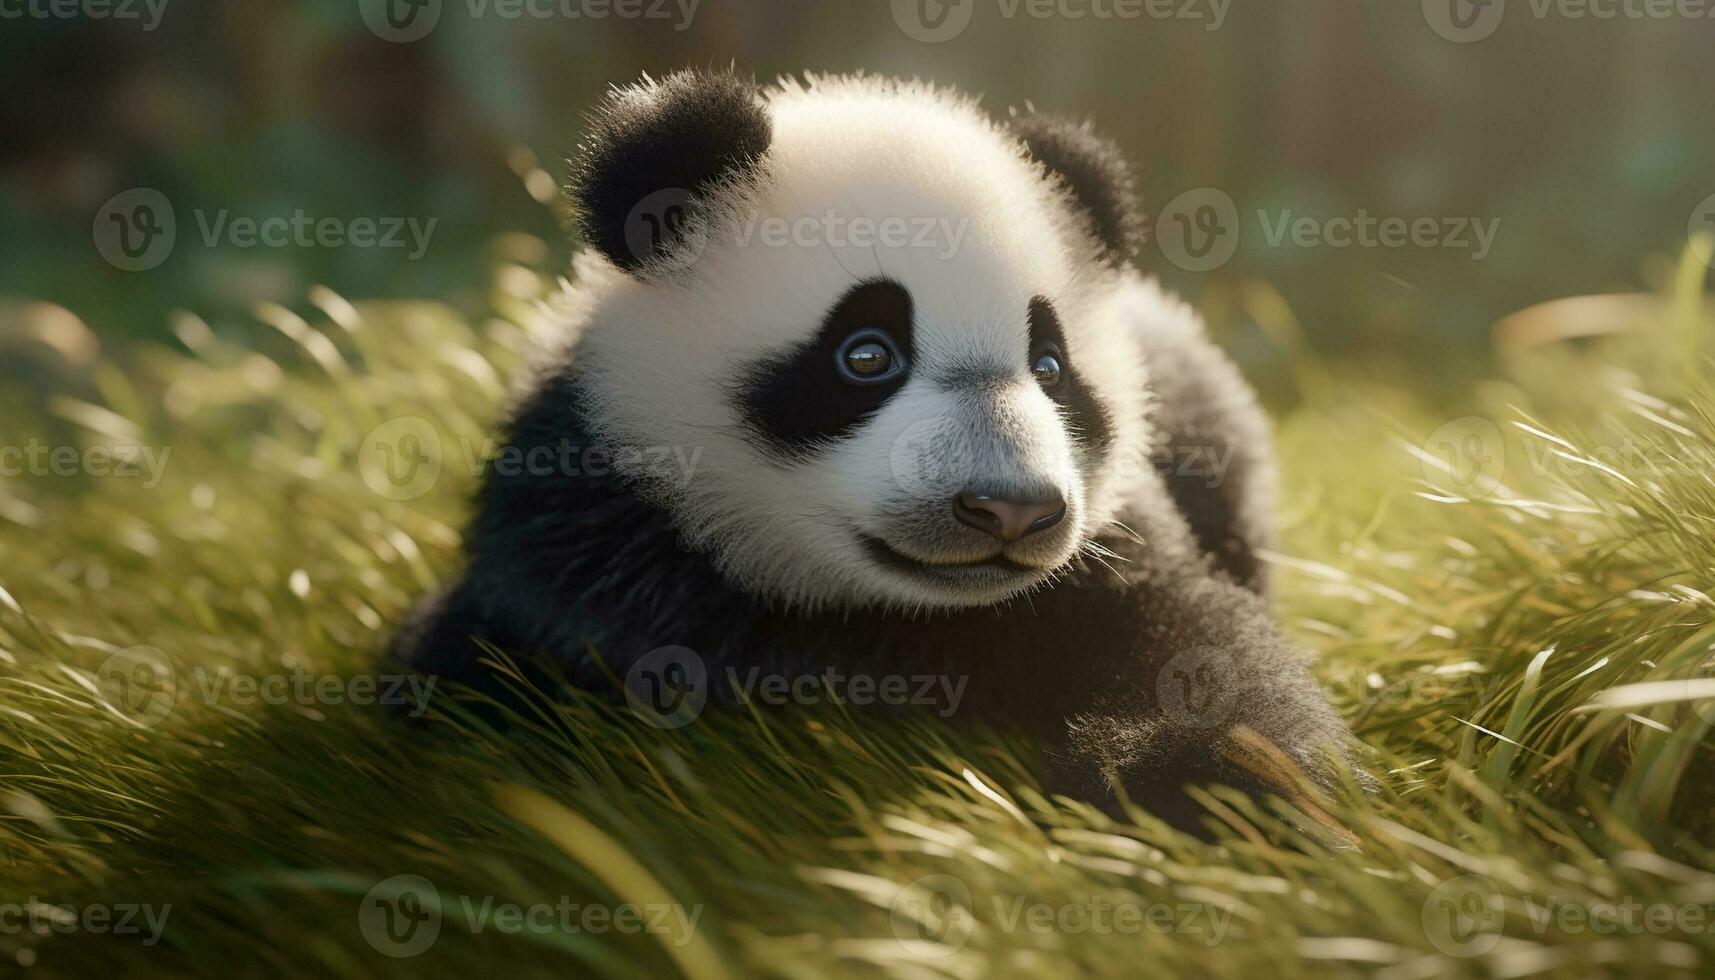 Cute mammal, panda, grass, outdoors, small, endangered species, young animal generated by AI photo